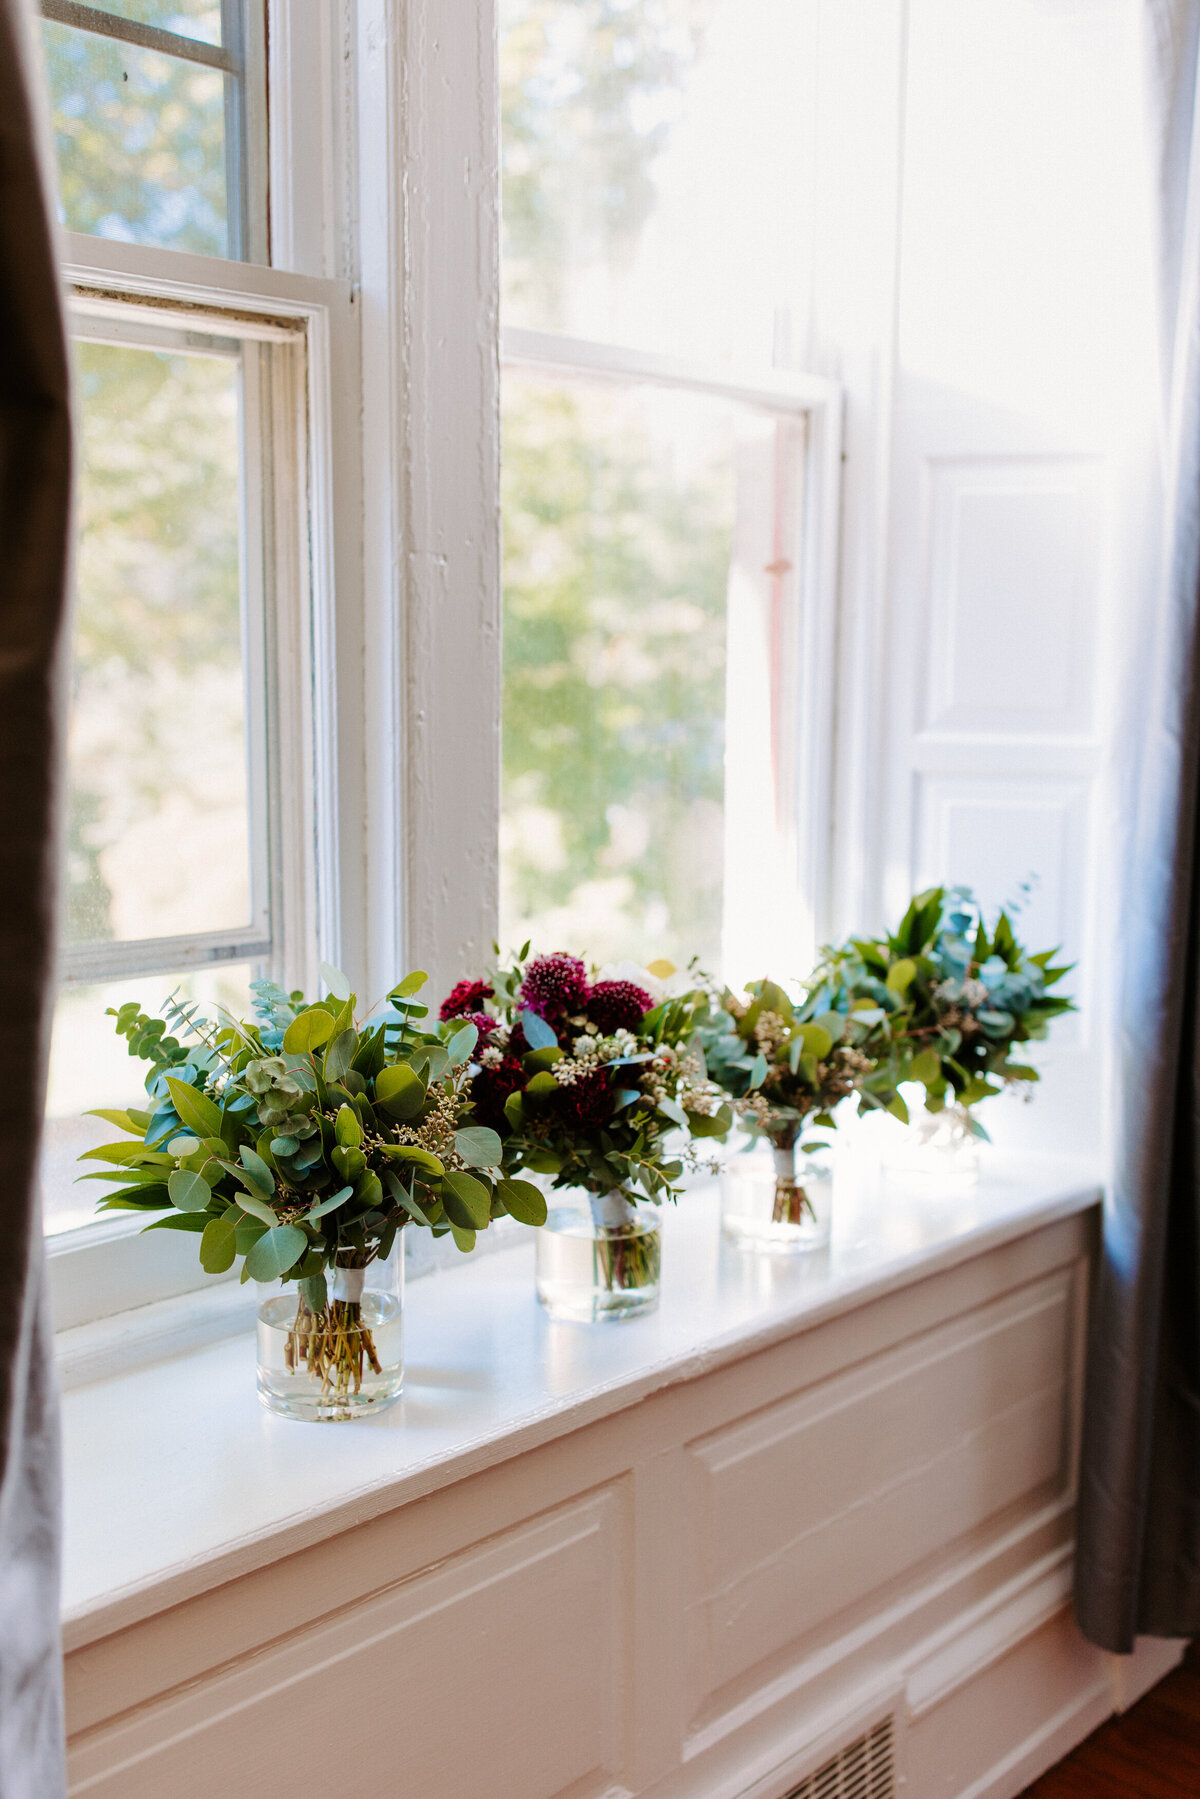 4 bouquets of flowers in vases lined along a windowsill